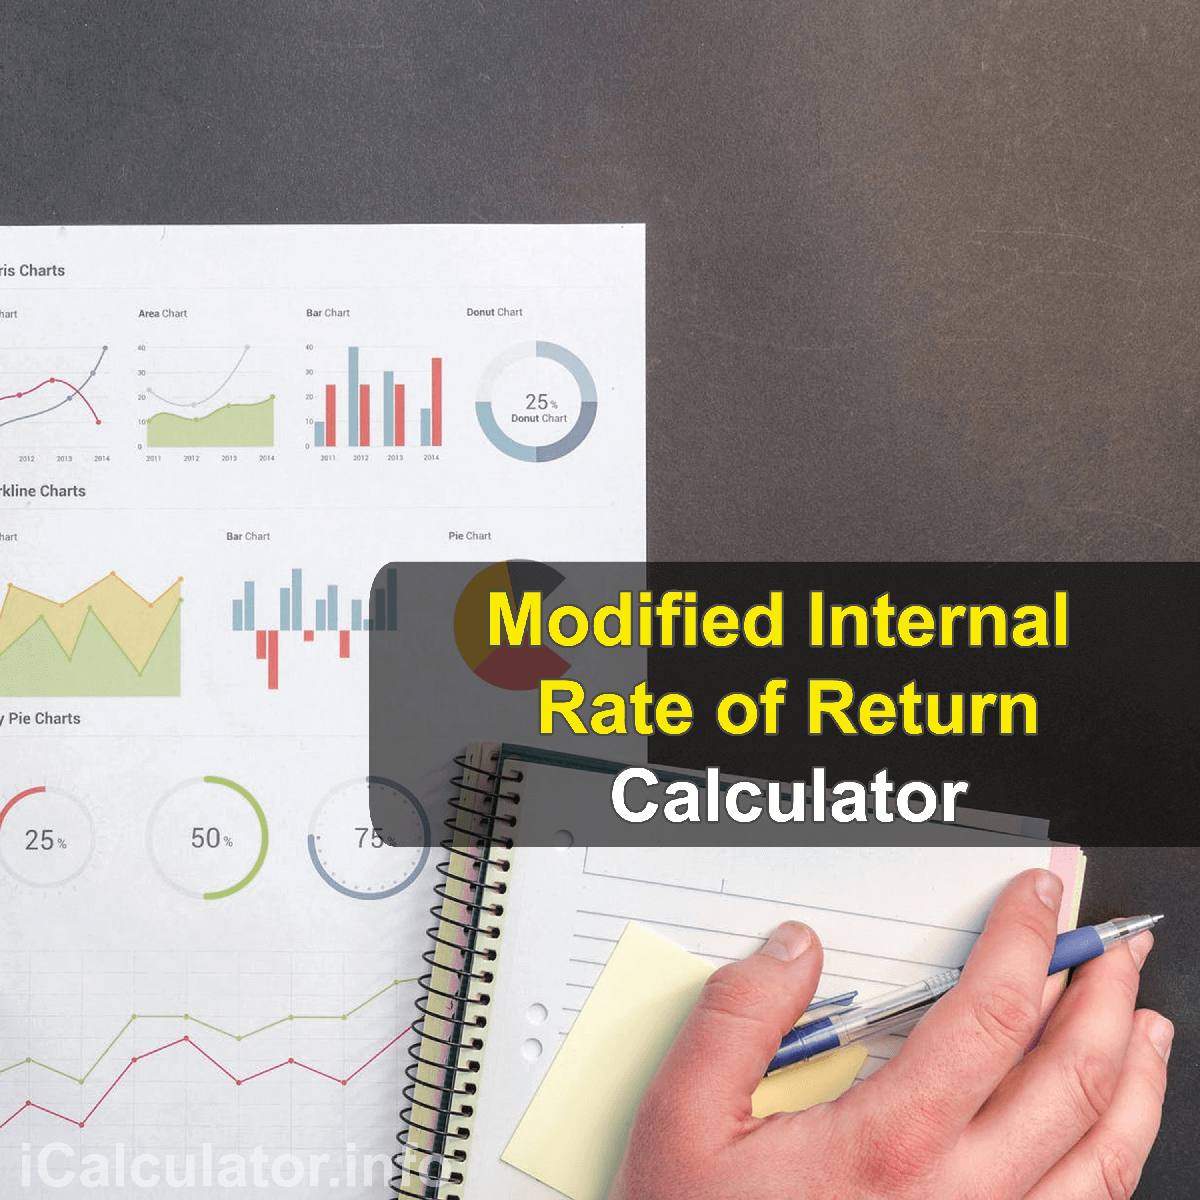 Modified Internal Rate Of Return Calculator. This image provides details of how to calculate Modified Internal Rate Of Return ratio using a calculator and notepad. By using the Modified Internal Rate Of Return Ratio formula, the Modified Internal Rate Of Return Calculator provides a true calculation of the attractiveness of an investment as well as for comparing various investments MIRR is one of the best financial instruments.